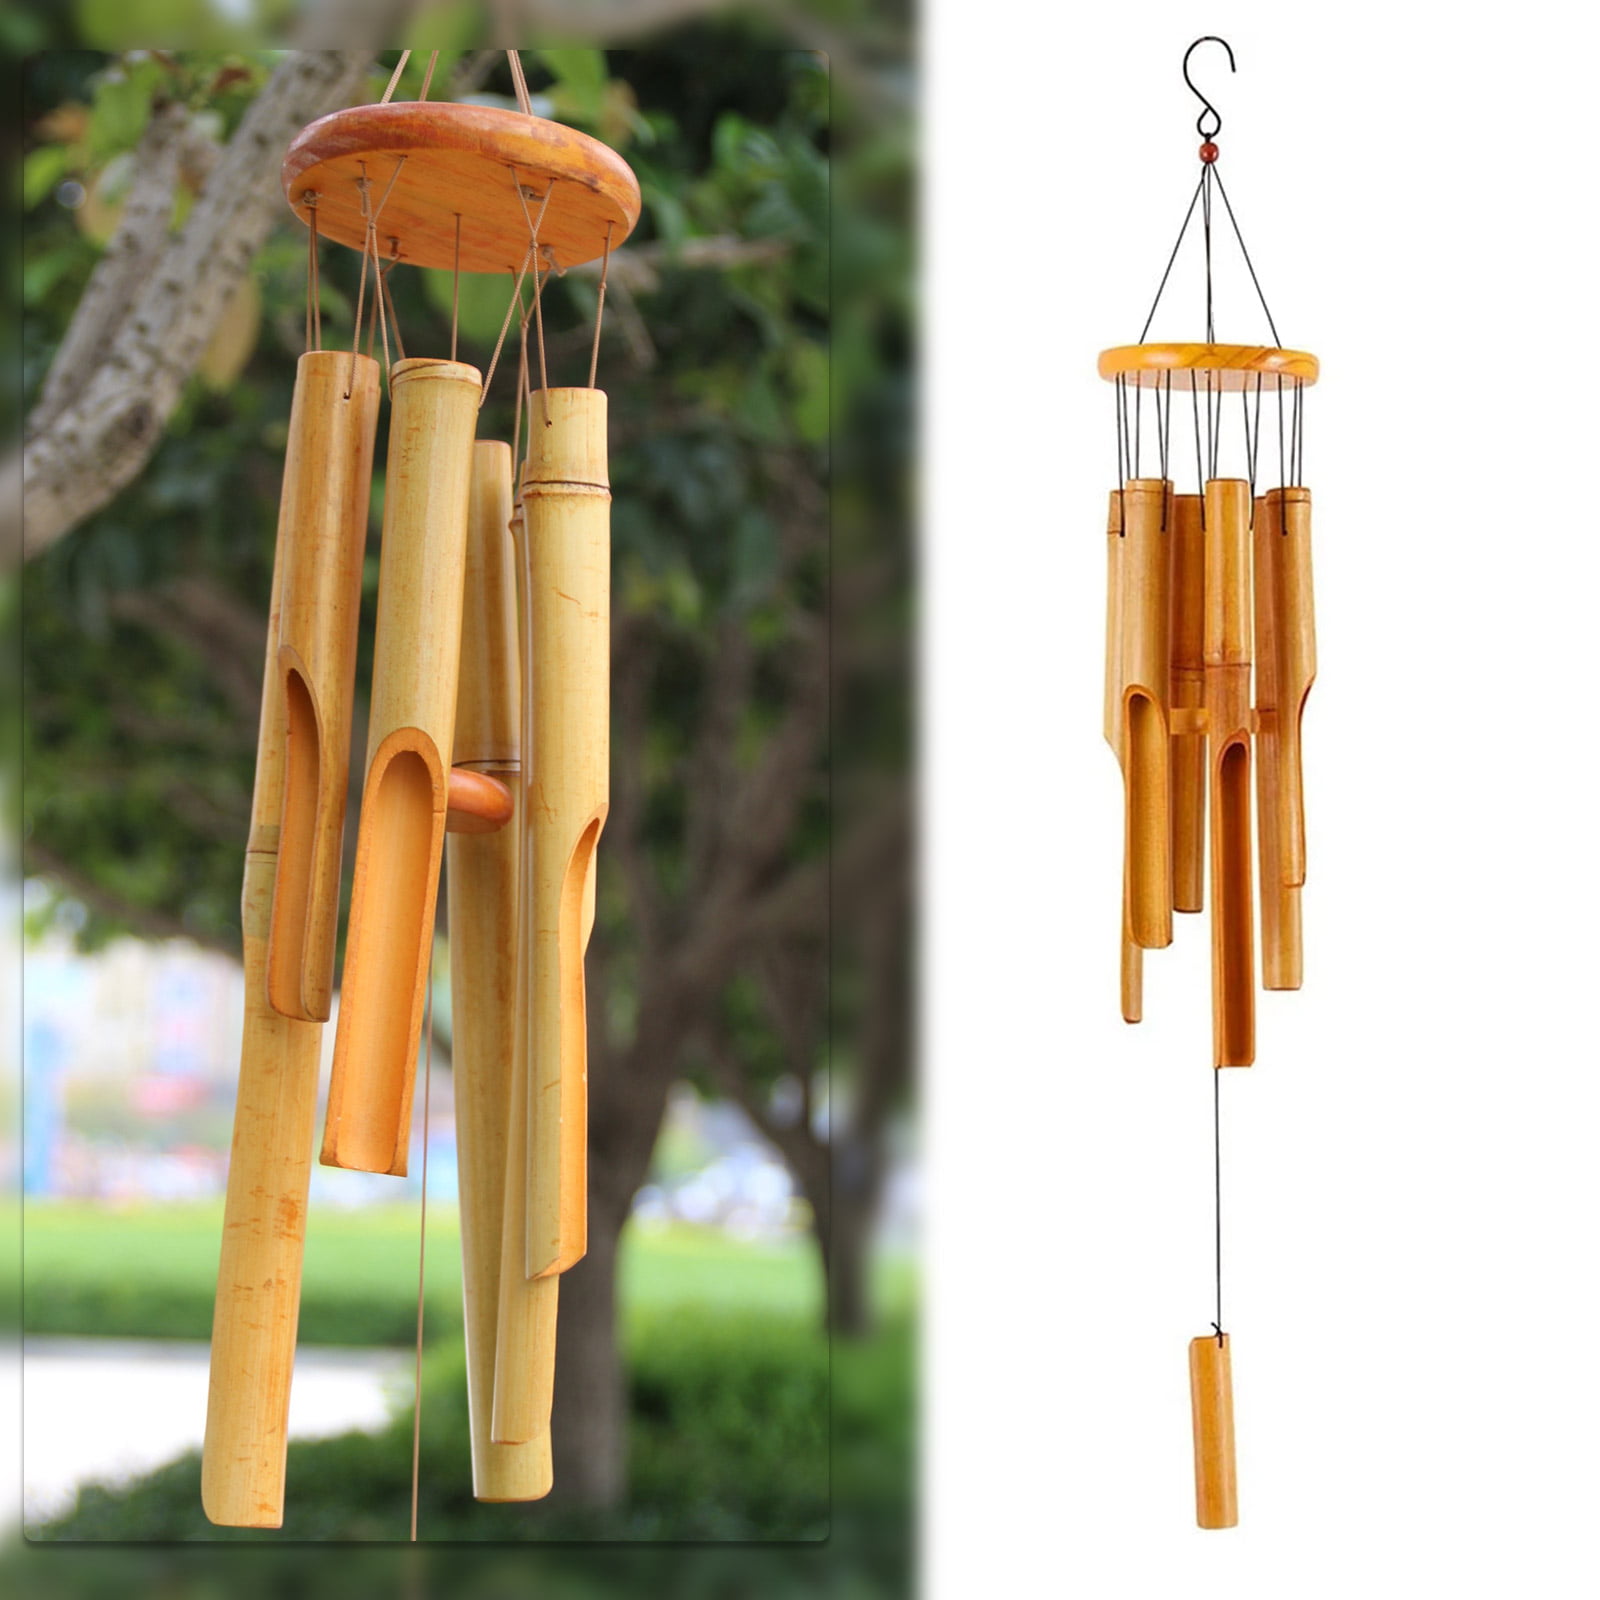 75cm Wind Chime Bell 6 Tubes Garden Home Hanging Decor Outdoor Ornament Windbell 